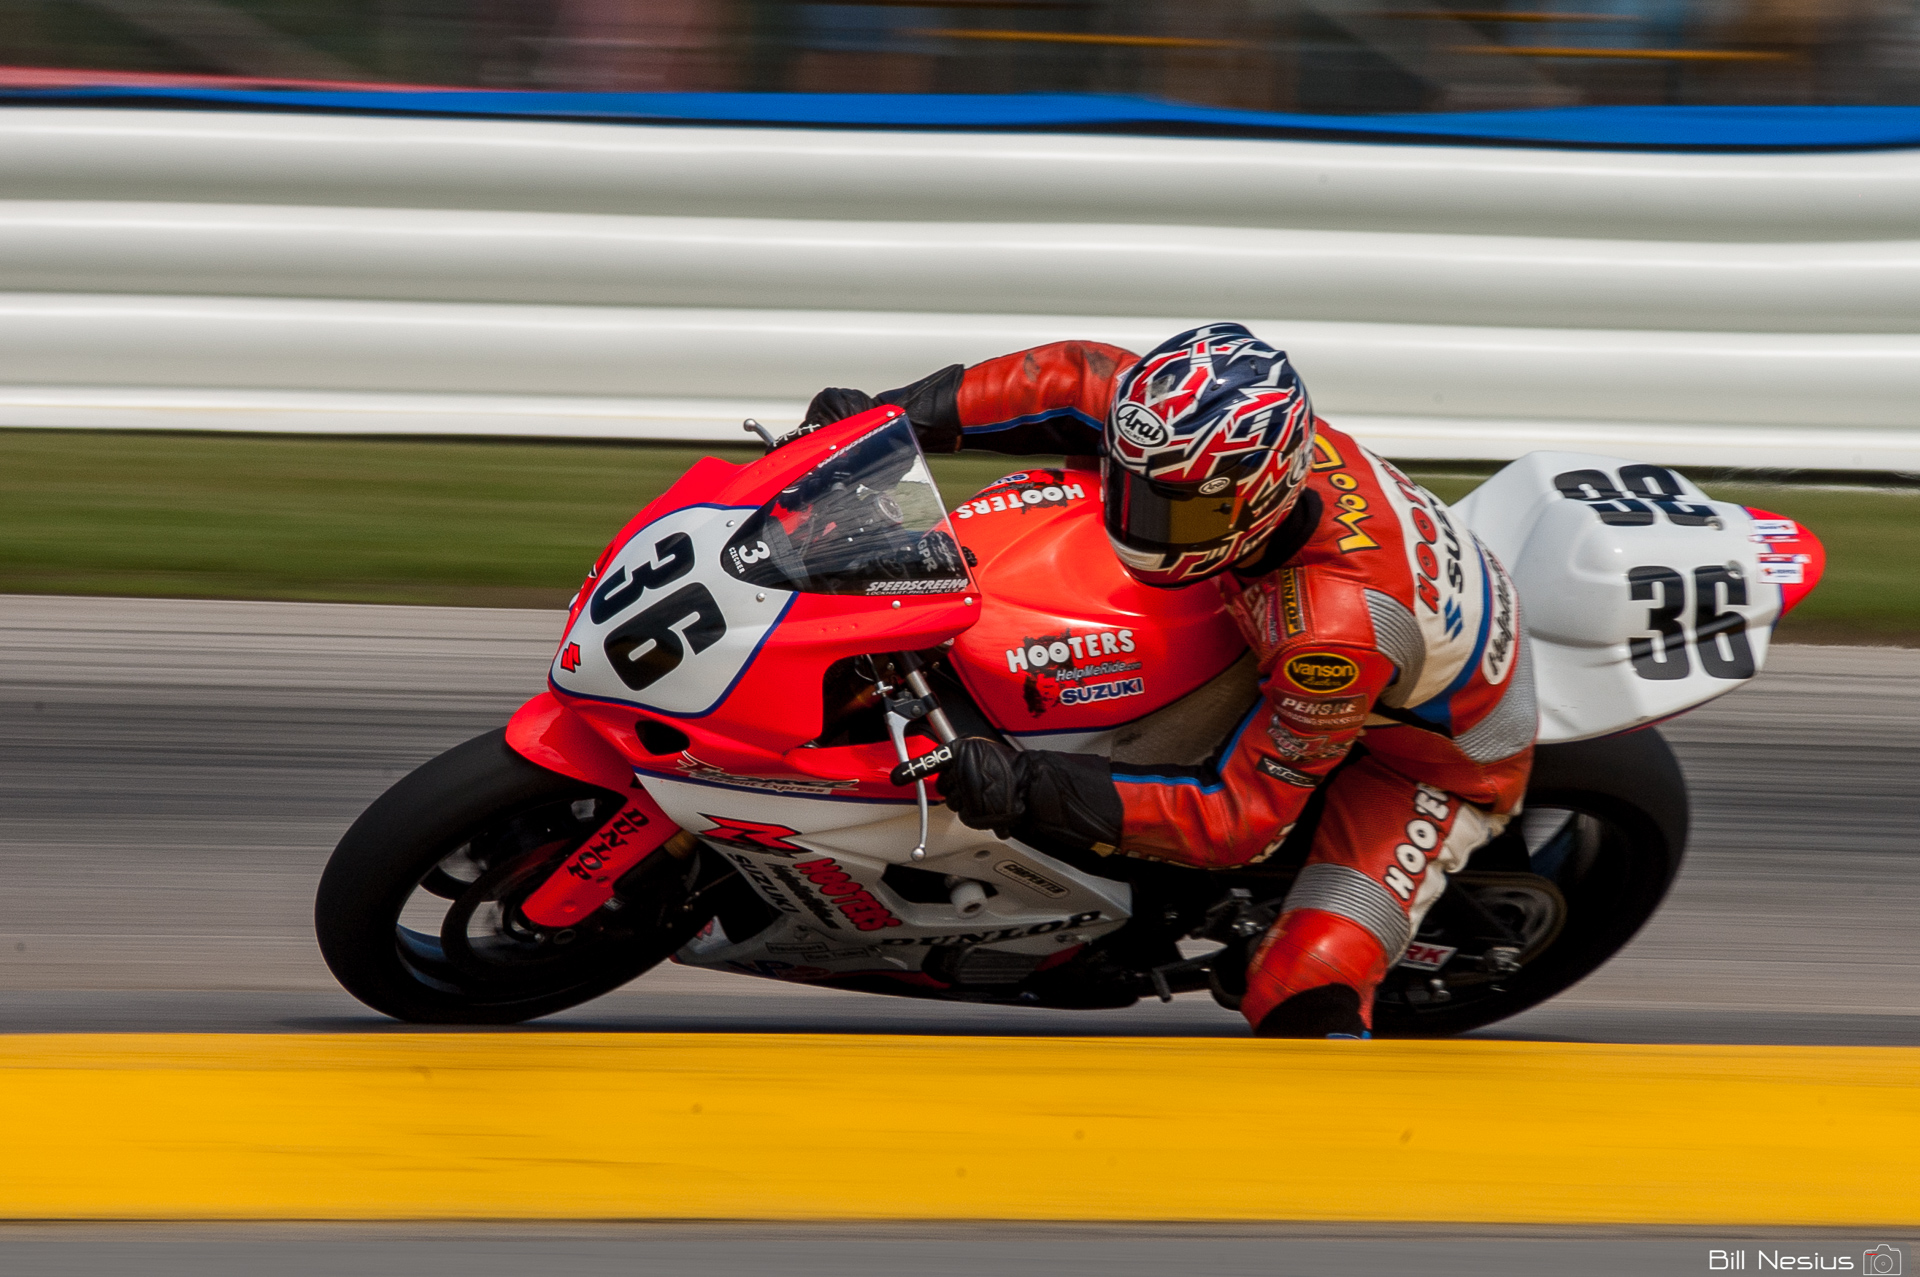 Eric Wood on the Number 36 Hooters Suzuki GSX-R1000 / DSC_6089 / 